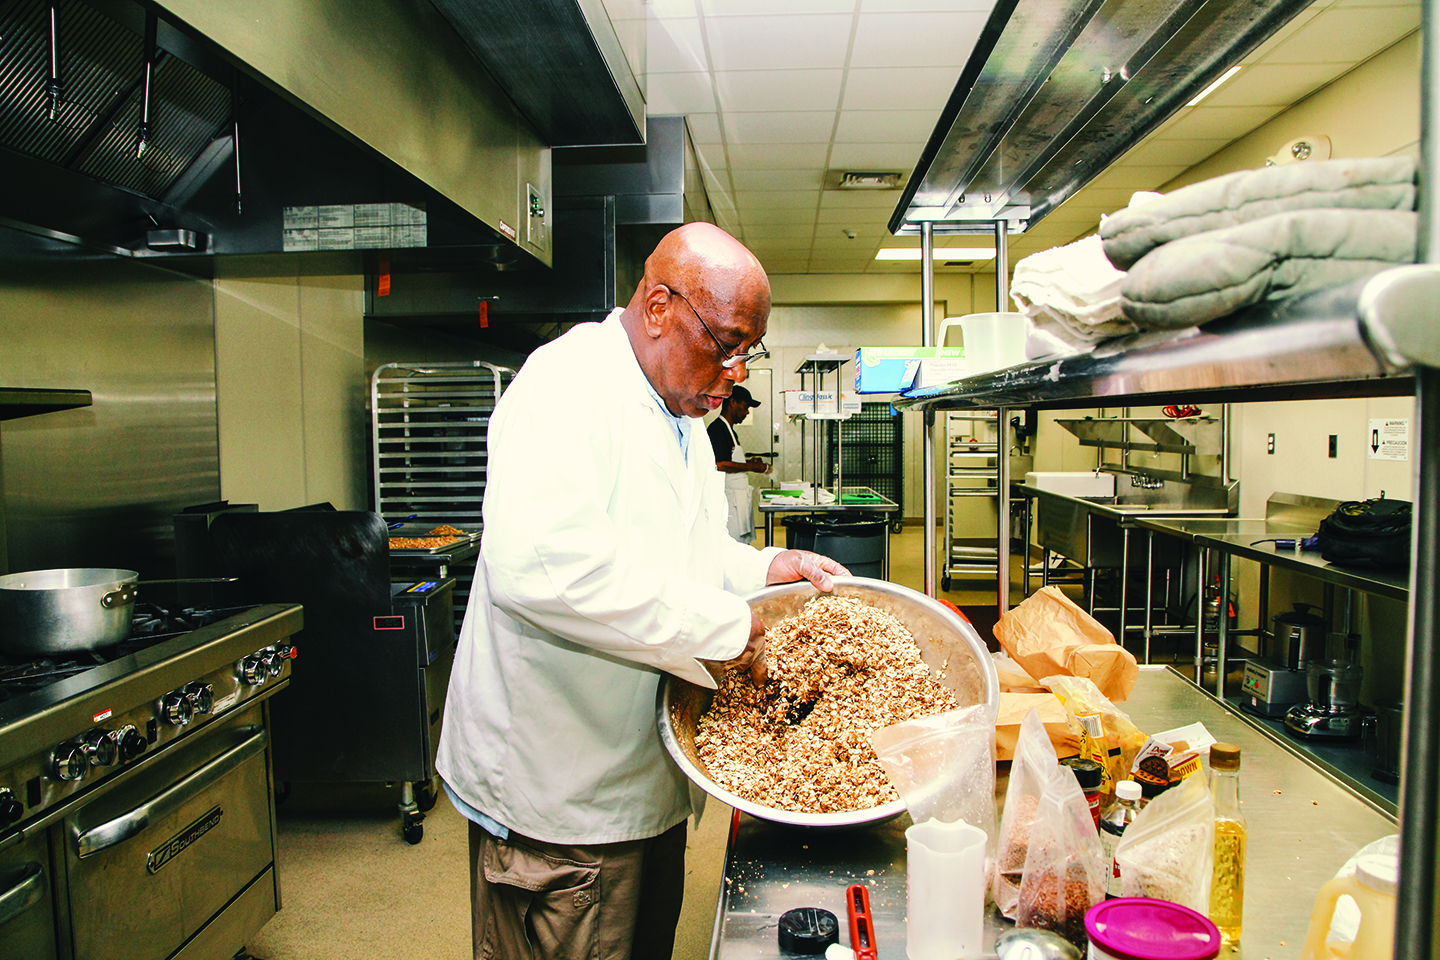 Victor Michael hand-mixes a batch of his&nbsp;Philly Delcious Granola&nbsp;| Photo by Stephen Dyer